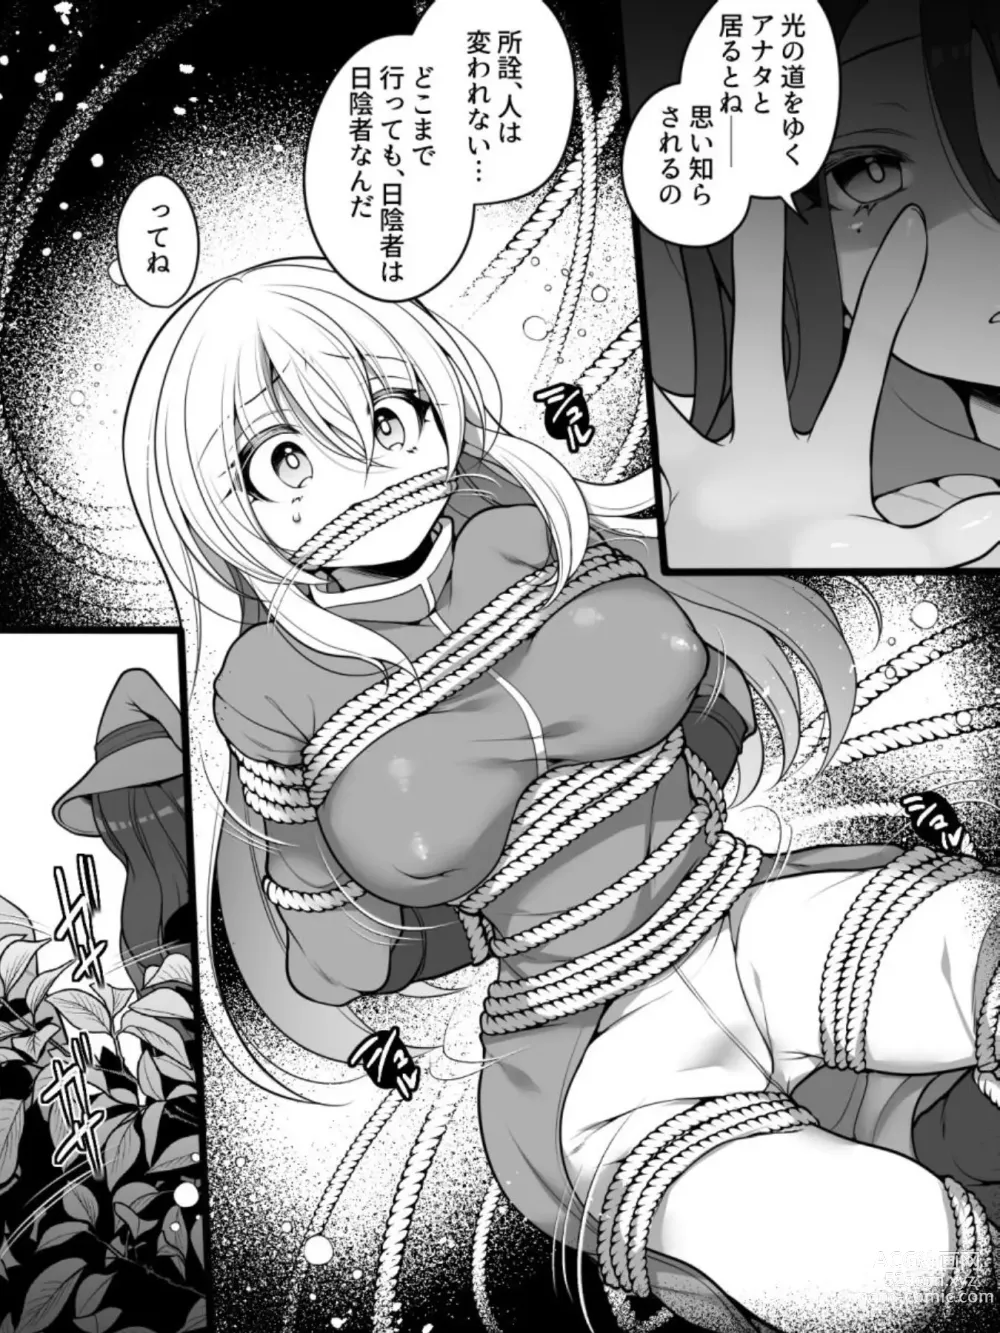 Page 5 of doujinshi TS Impregnated Princess ~A story about a former hero who becomes the princess of a group of orcs~